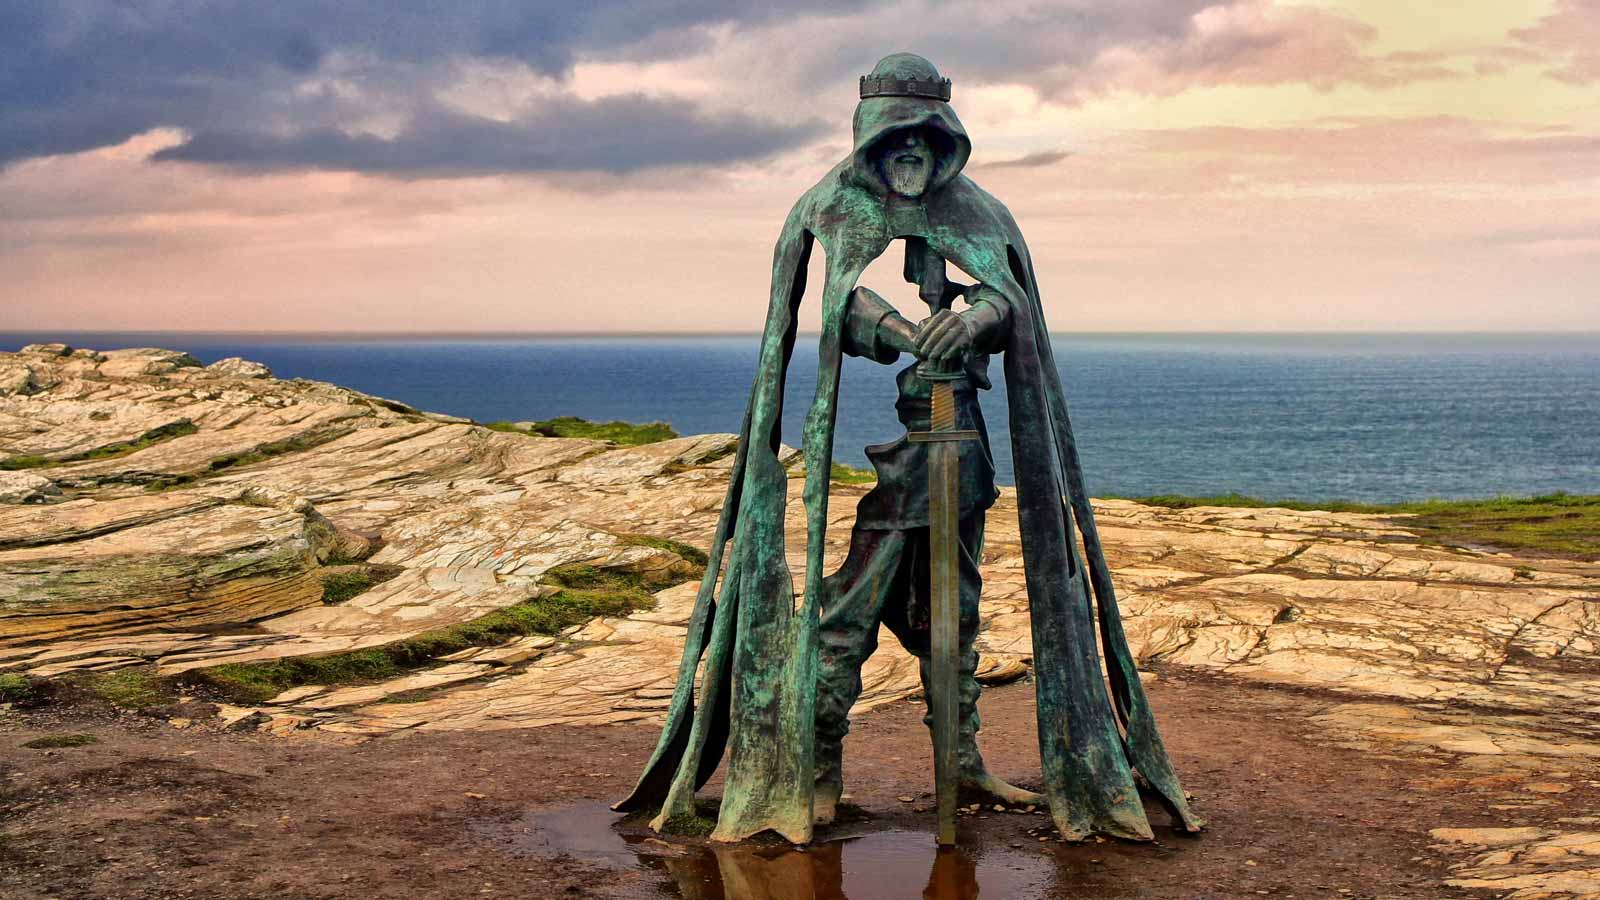 <p><span>Otherwise known as the Statue of King Arthur, the “Gallos” sculpture is at Tintagel Castle in North Cornwall, England. Artist Rubin Eynon created the 8-foot-tall bronze piece. </span></p><p><span>While it’s commonly associated with King Arthur, the ‘Gallos’ sculpture, according to its owner, English Heritage, does not represent a single individual. Instead, it serves as a testament to the rich history of the site it graces. North Cornwall, a believed summer retreat for the kings of Dumnonia, holds a significant place in England’s history.</span></p>